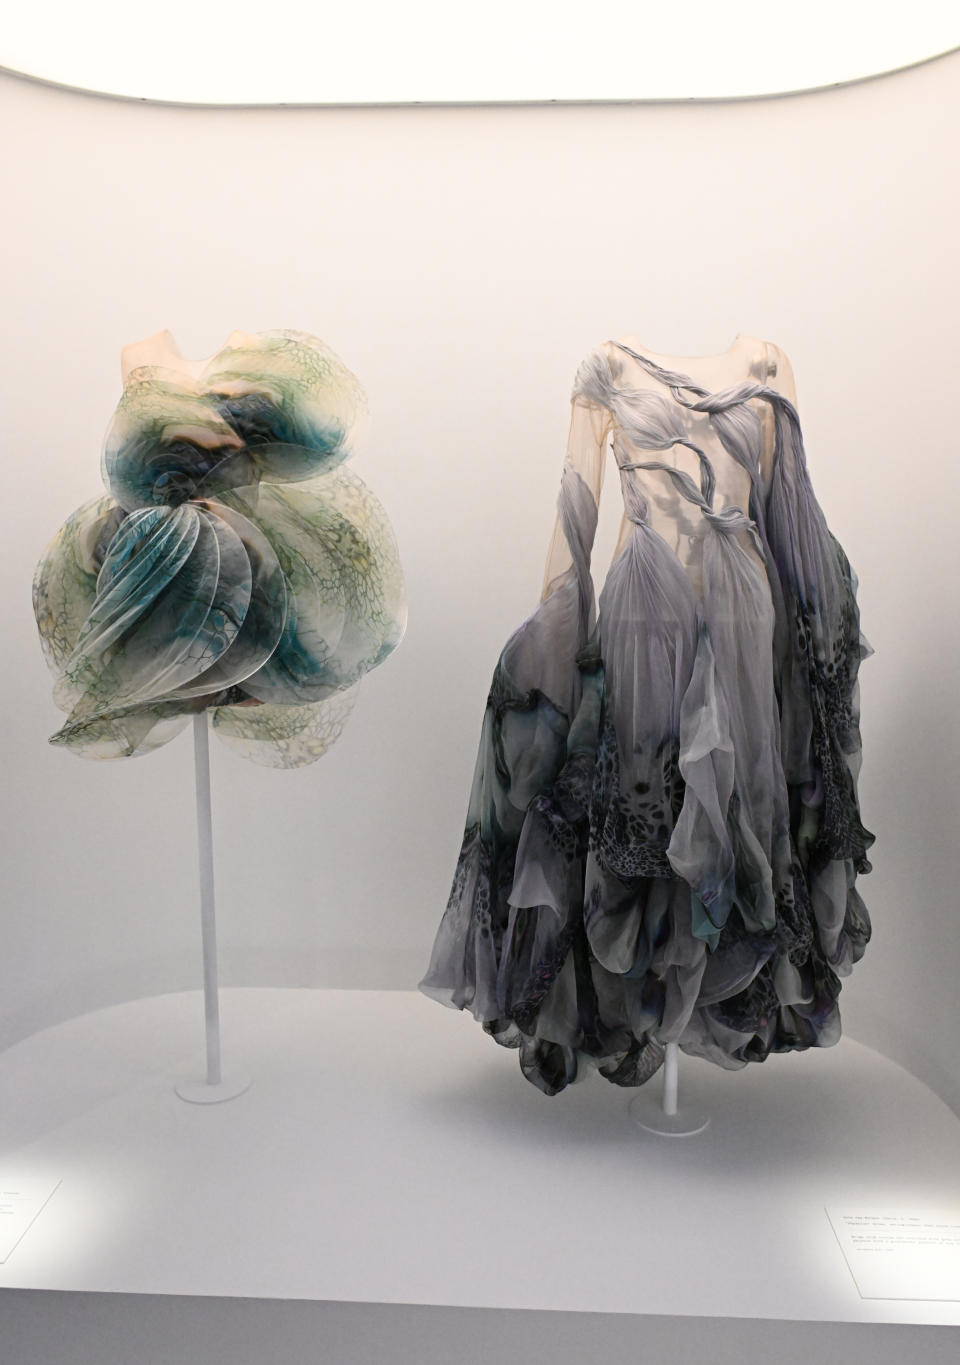 Two unique dresses on mannequins displayed in an exhibit, one with a voluminous, layered design